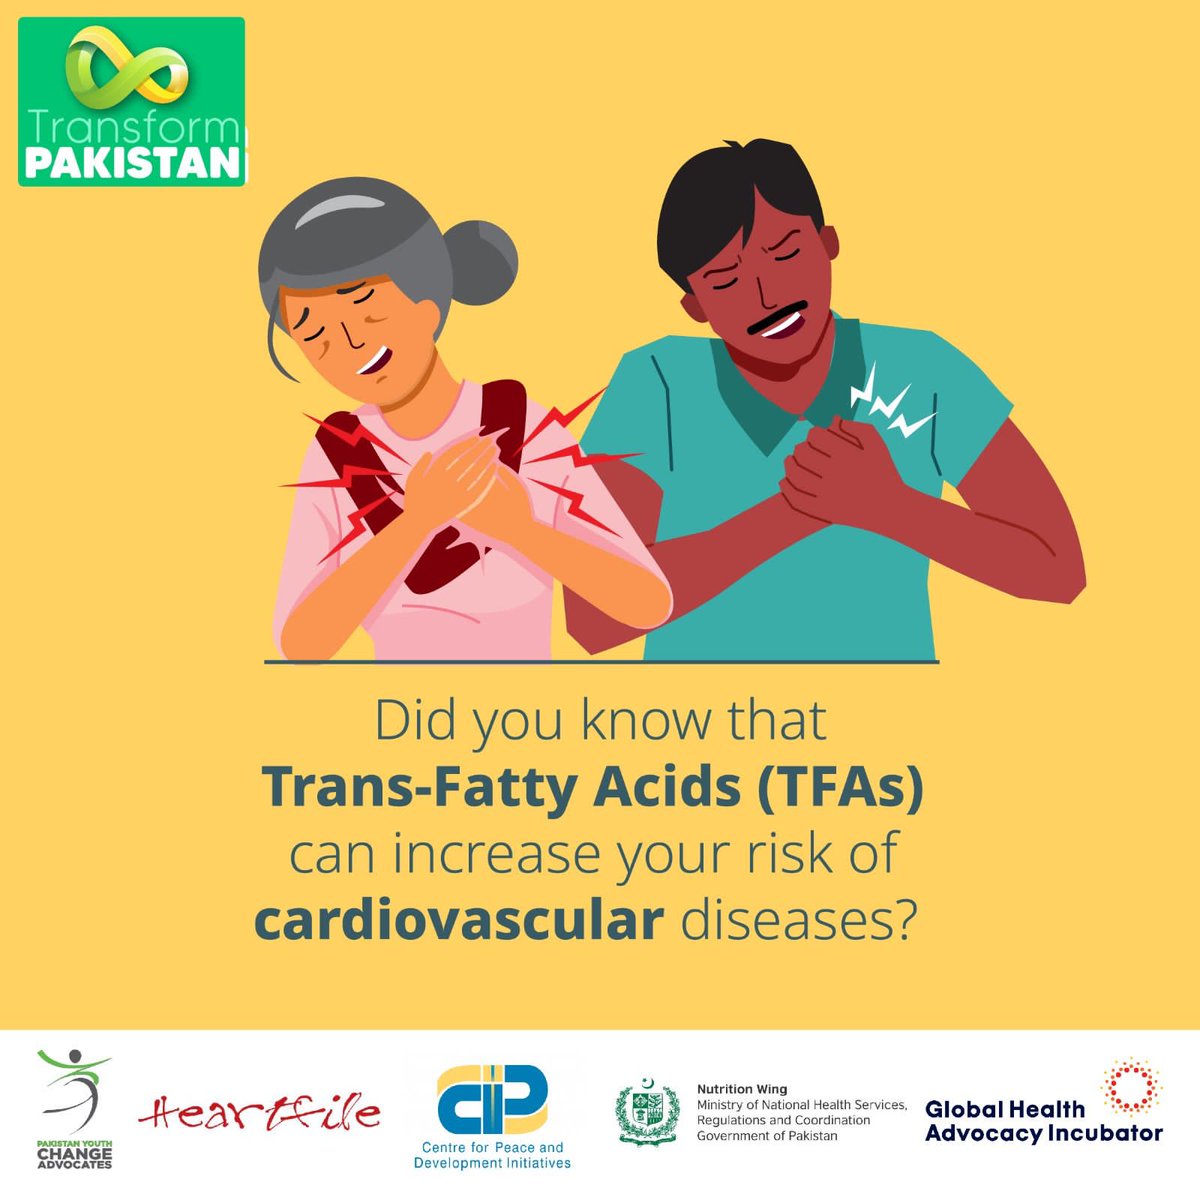 You don't have to eat less! Just eat right to keep your health in check.

#TFAawareness #TransfatsFreePakistan